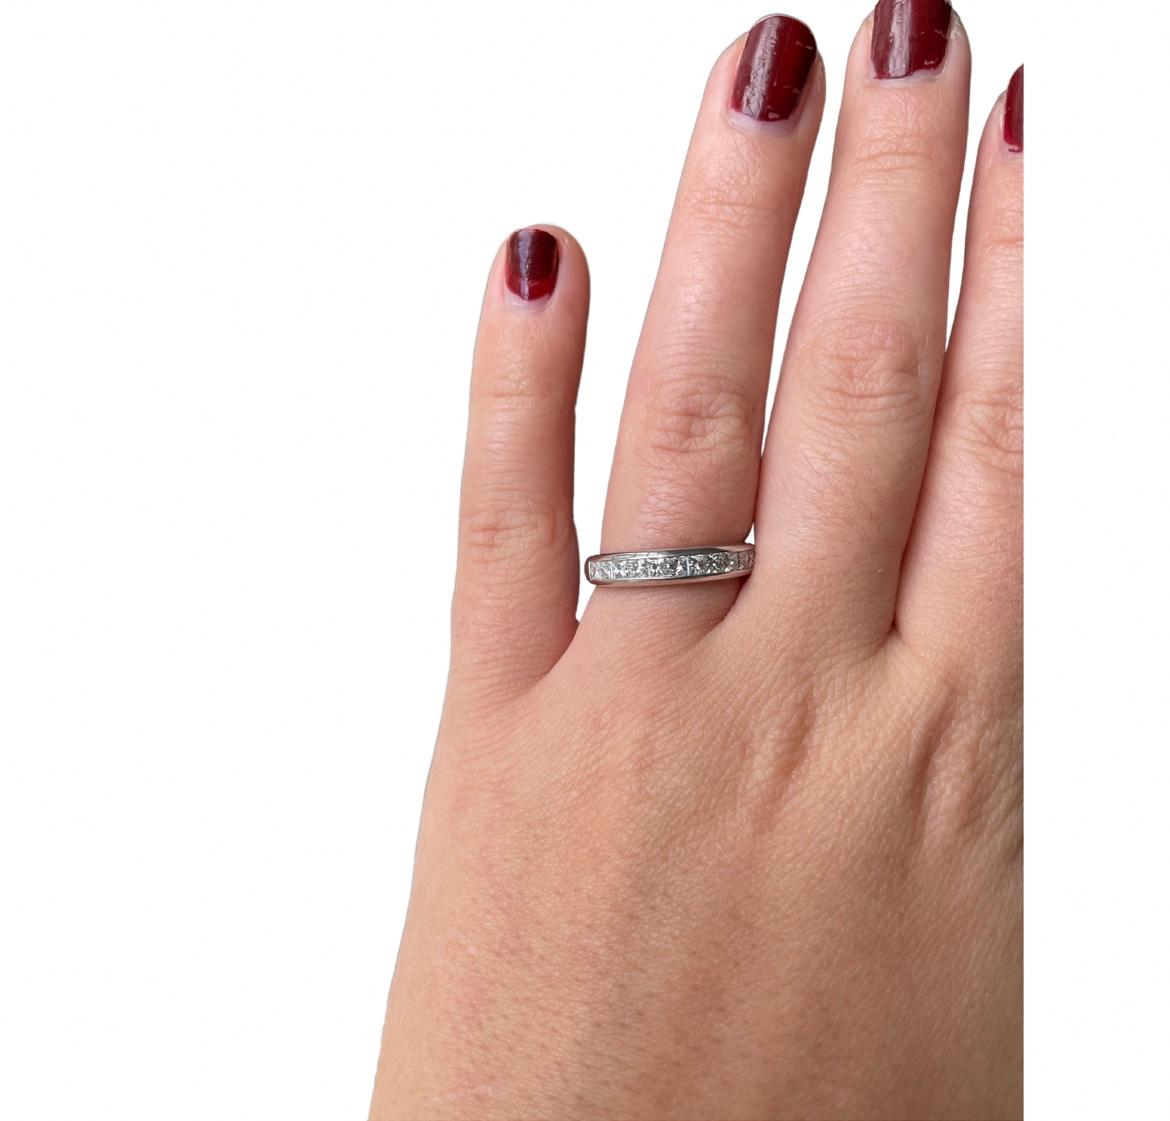 You'll love wearing this simple but classic diamond band. This elegant ring is 0.77 ctw of dazzling princess cut diamonds with VS-SI clarity and G-H color. These gorgeous diamonds are set in six grams of platinum. Perfect to wear as a wedding band,